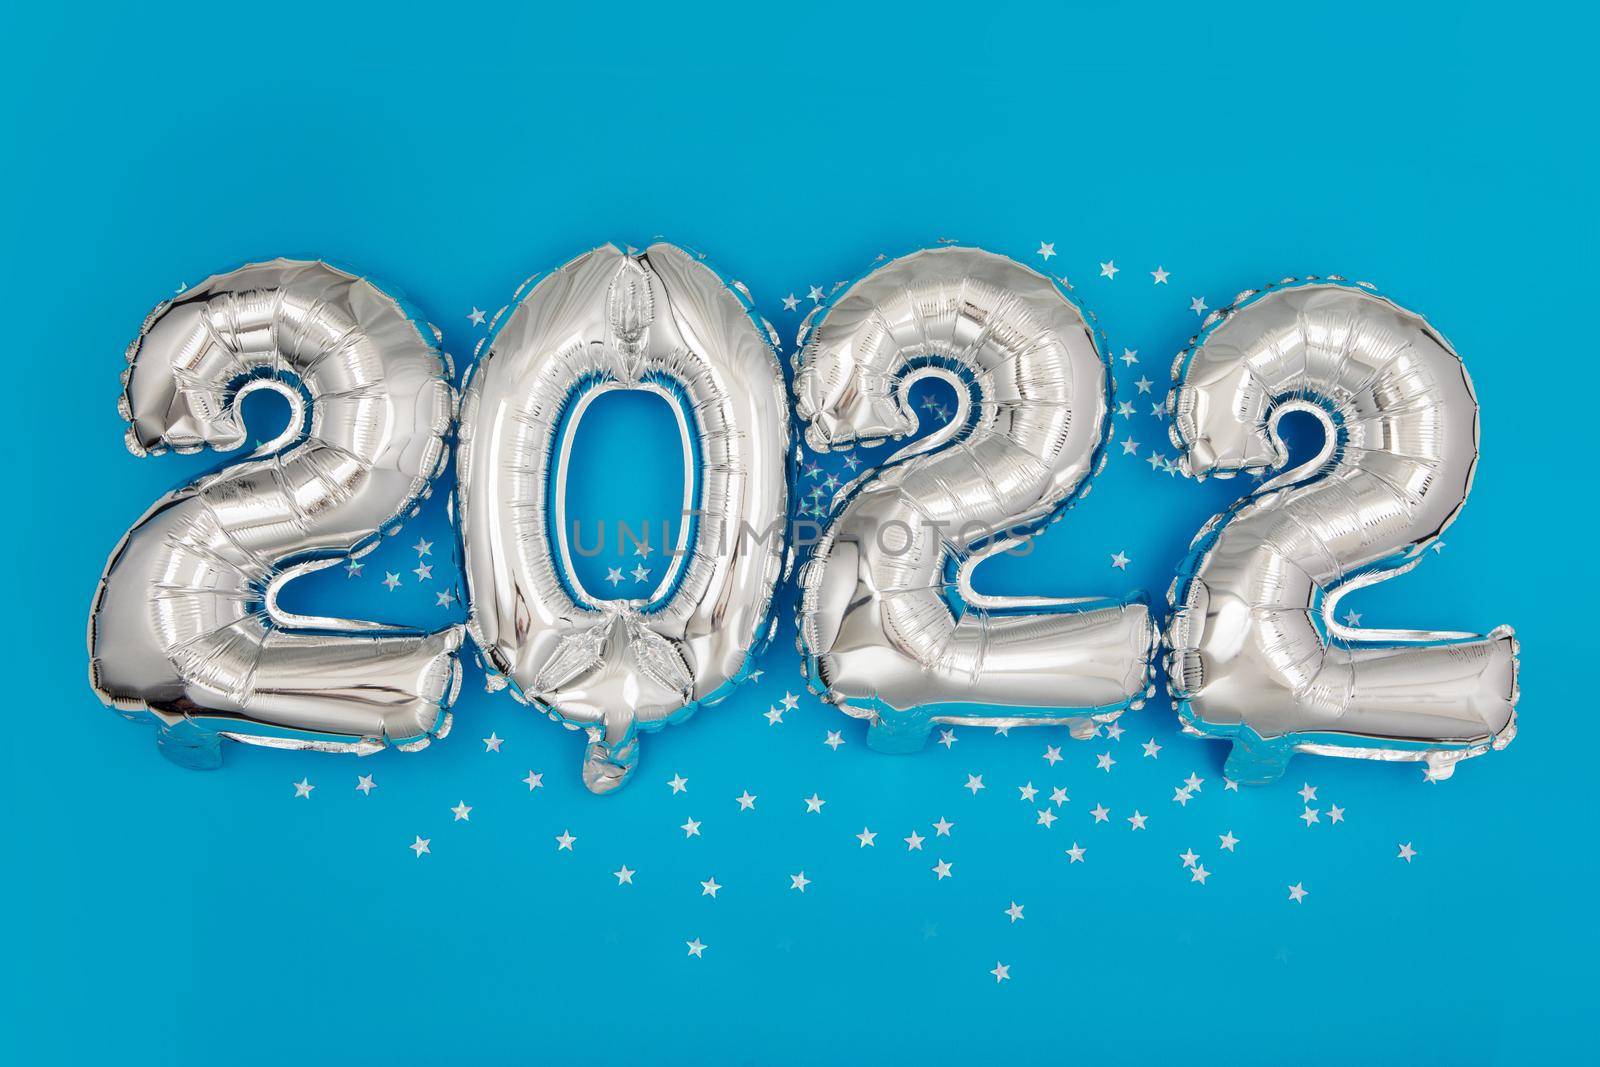 From above of silver number balloons showing 2022 year on blue background with star shaped confetti